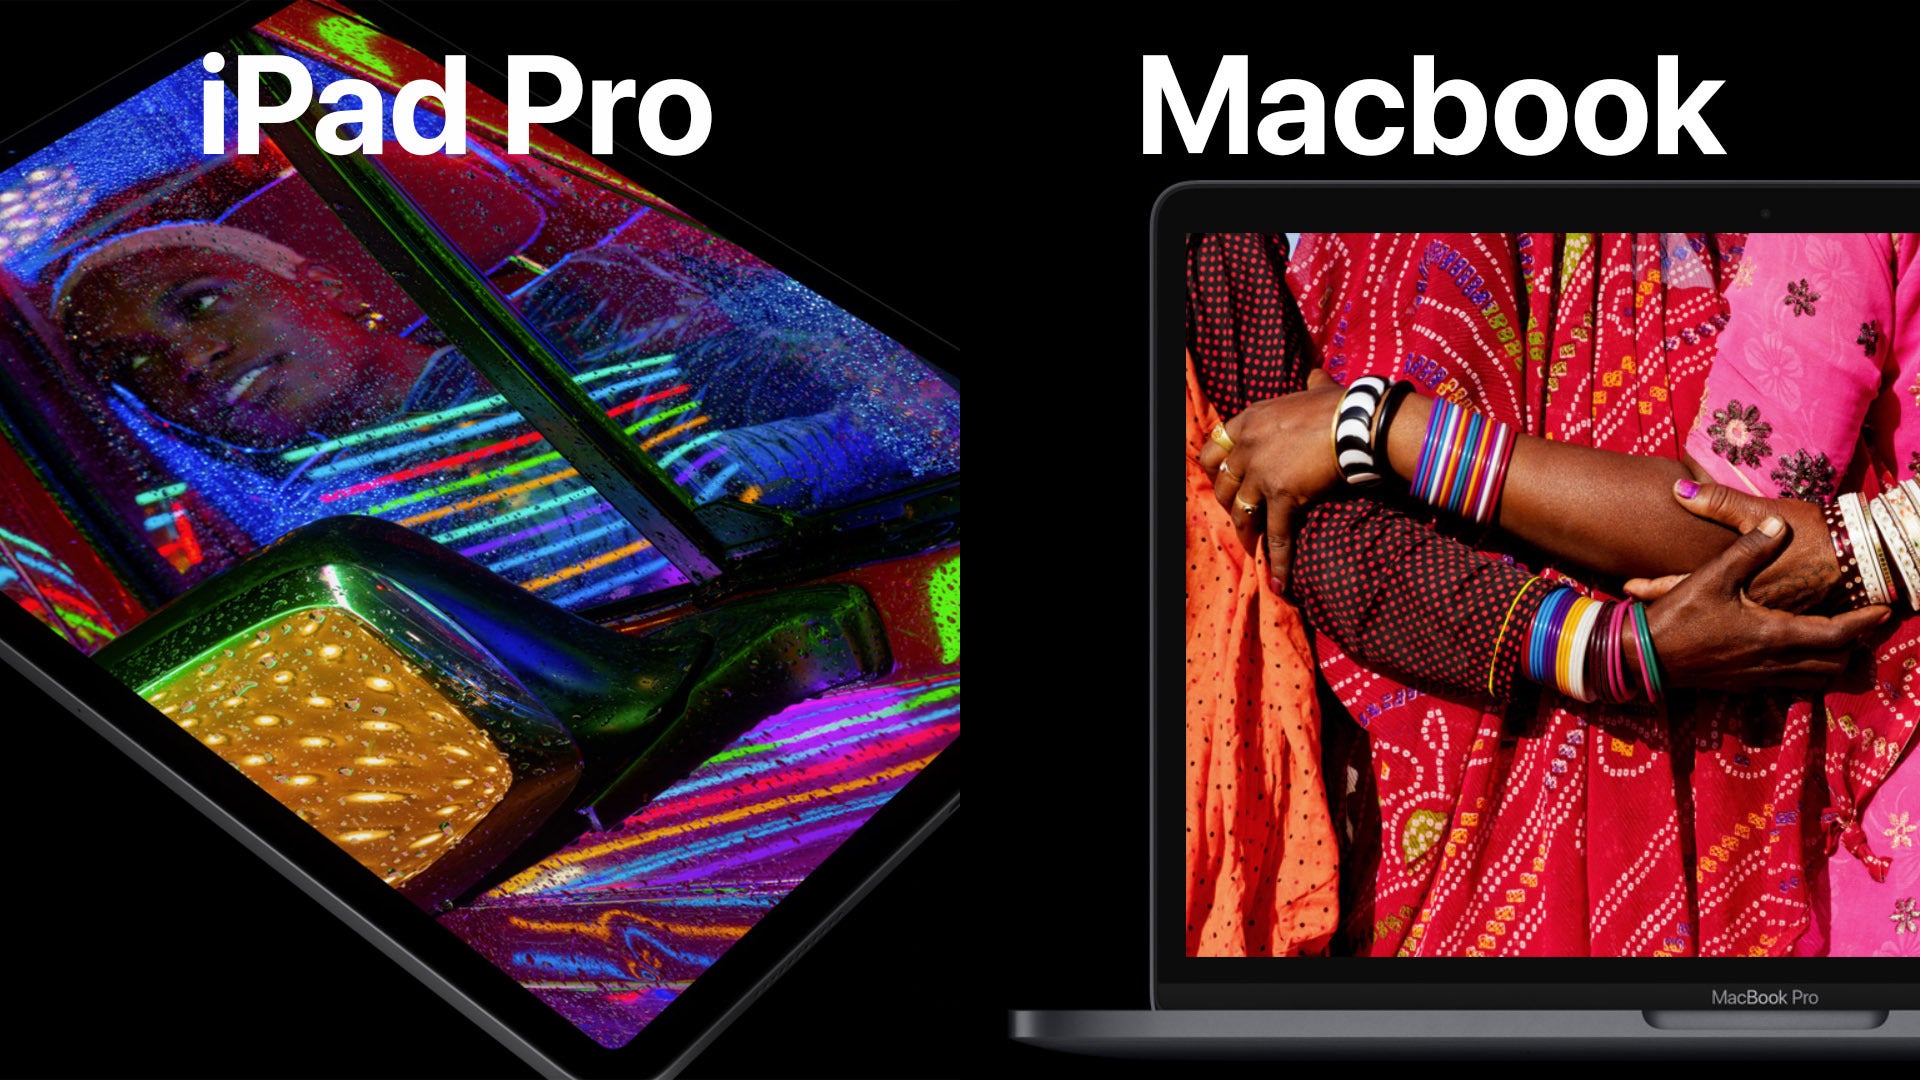 iPad Pro 2021 (M1) vs MacBook (M1): what are the differences?